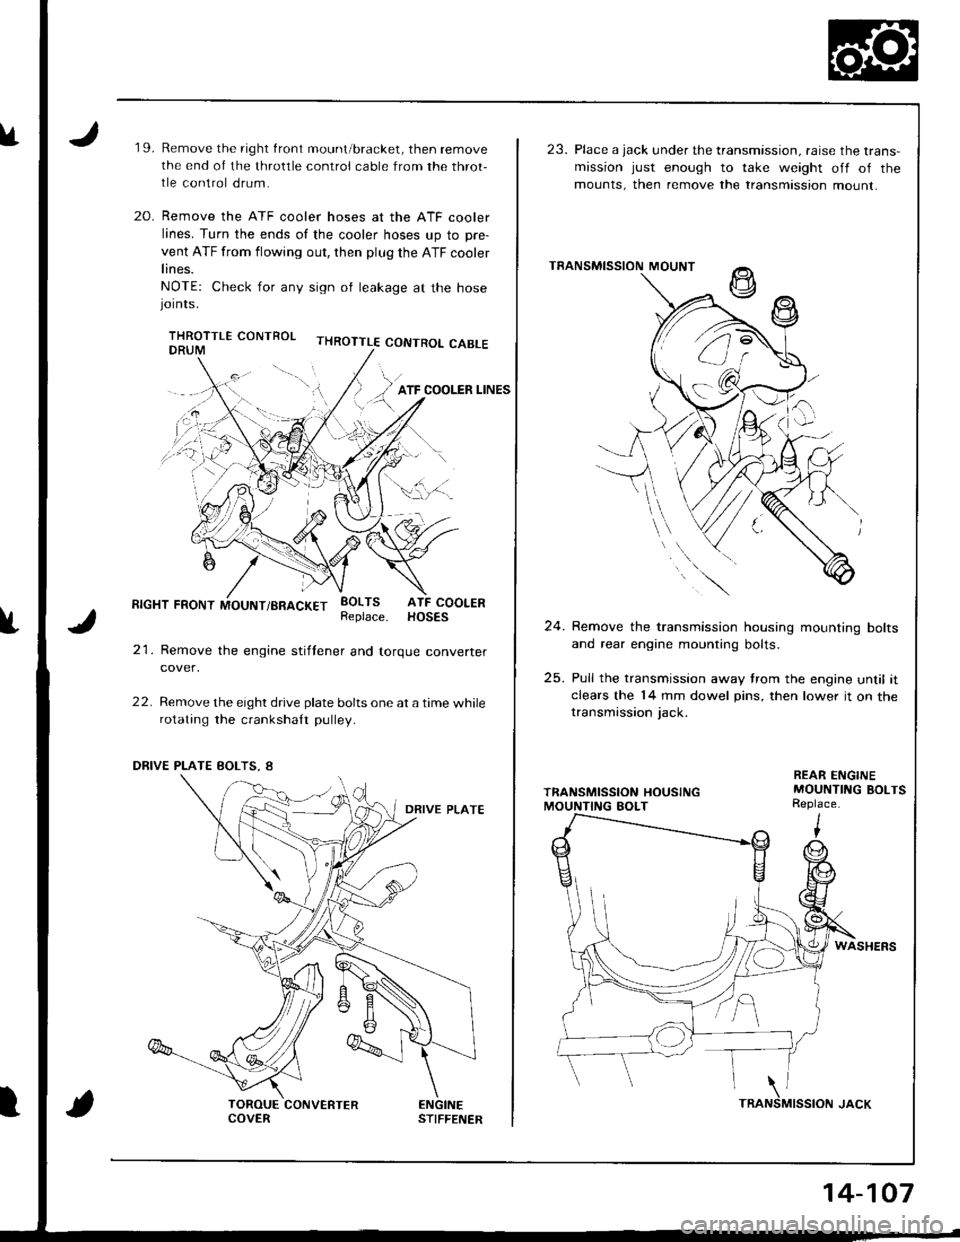 HONDA INTEGRA 1998 4.G Workshop Manual u19.Remove the right front mount/bracket, then remove
the end of the throltle control cable from the throt-
tle control drum.
Remove the ATF cooler hoses at the ATF cooler
lines. Turn the ends of the 